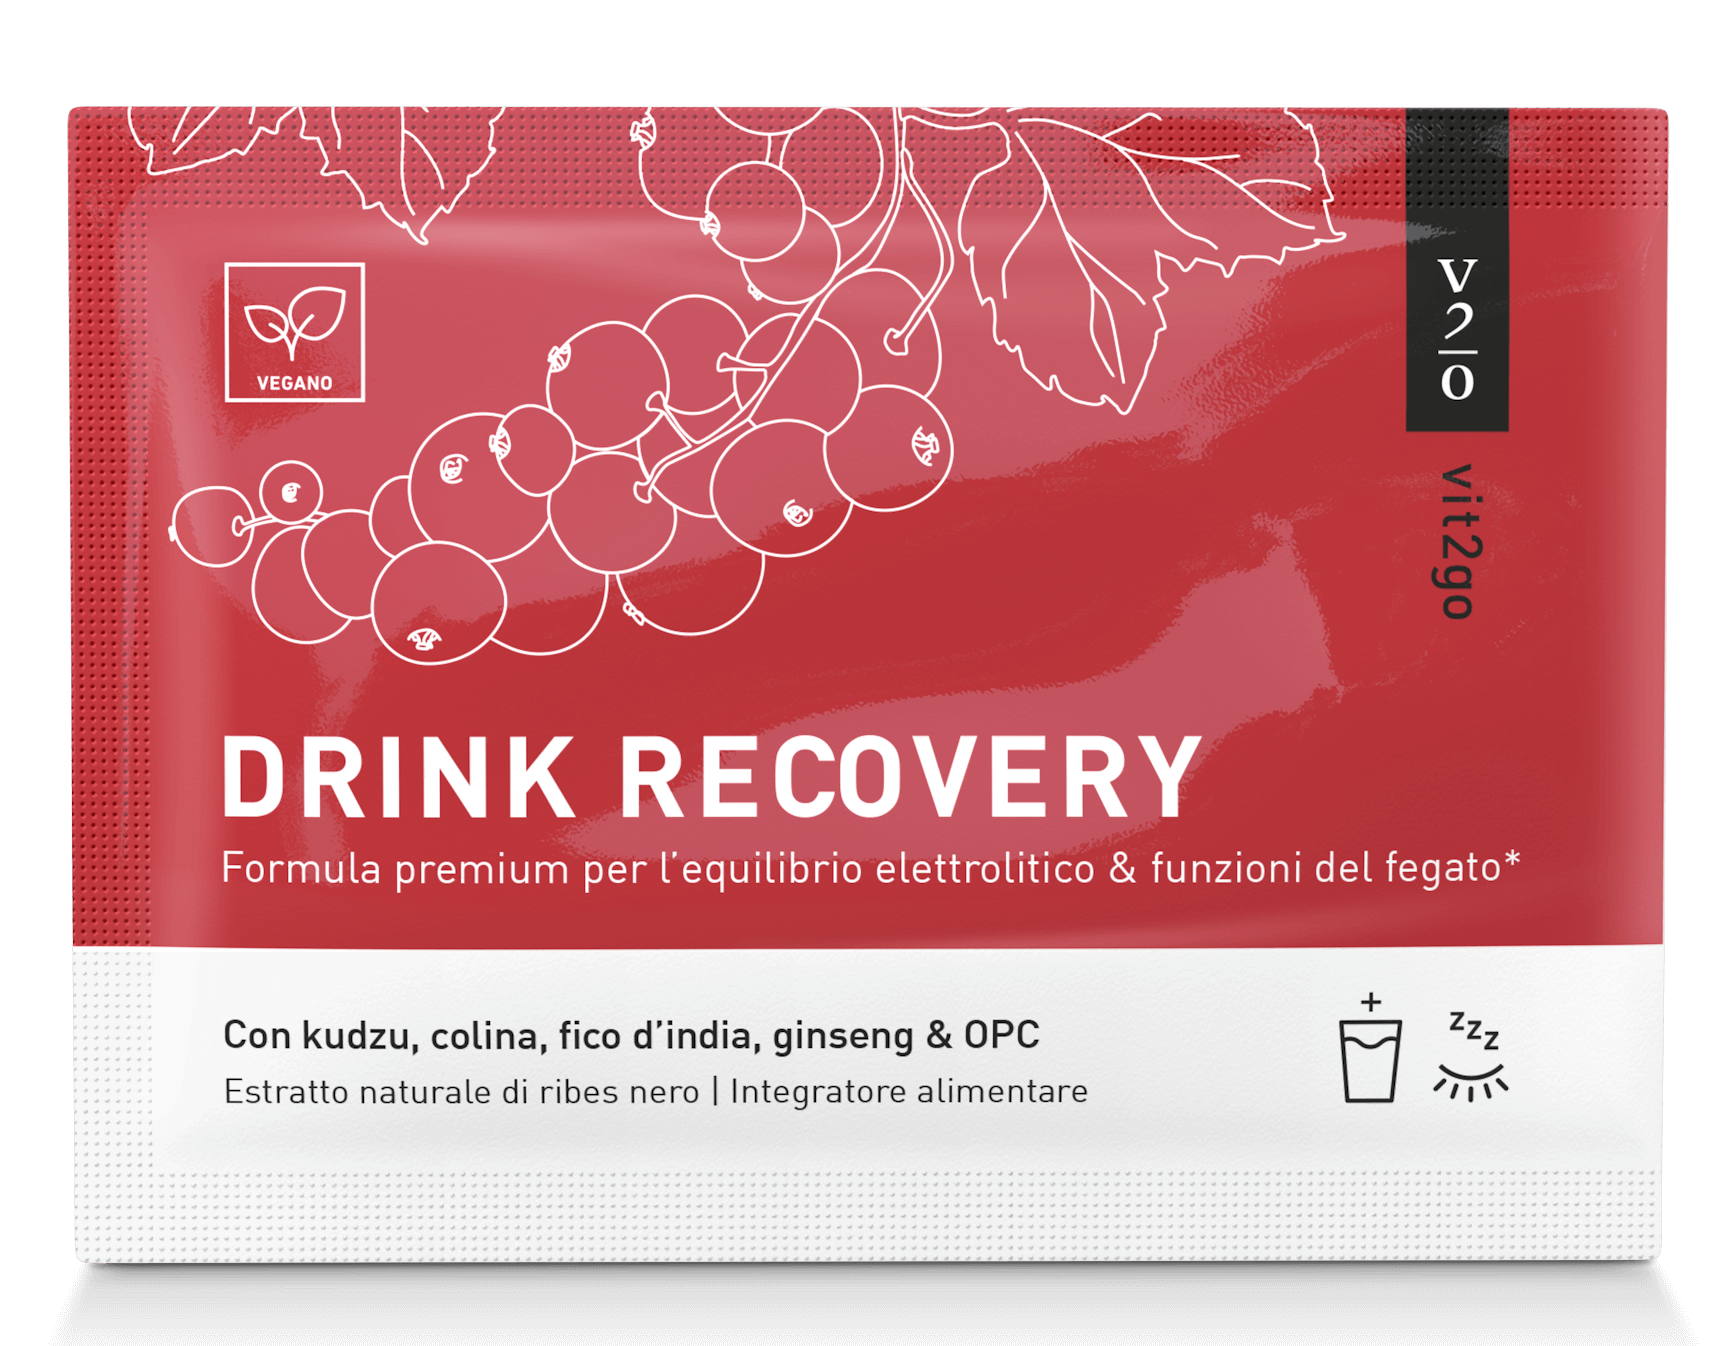 DRINK RECOVERY